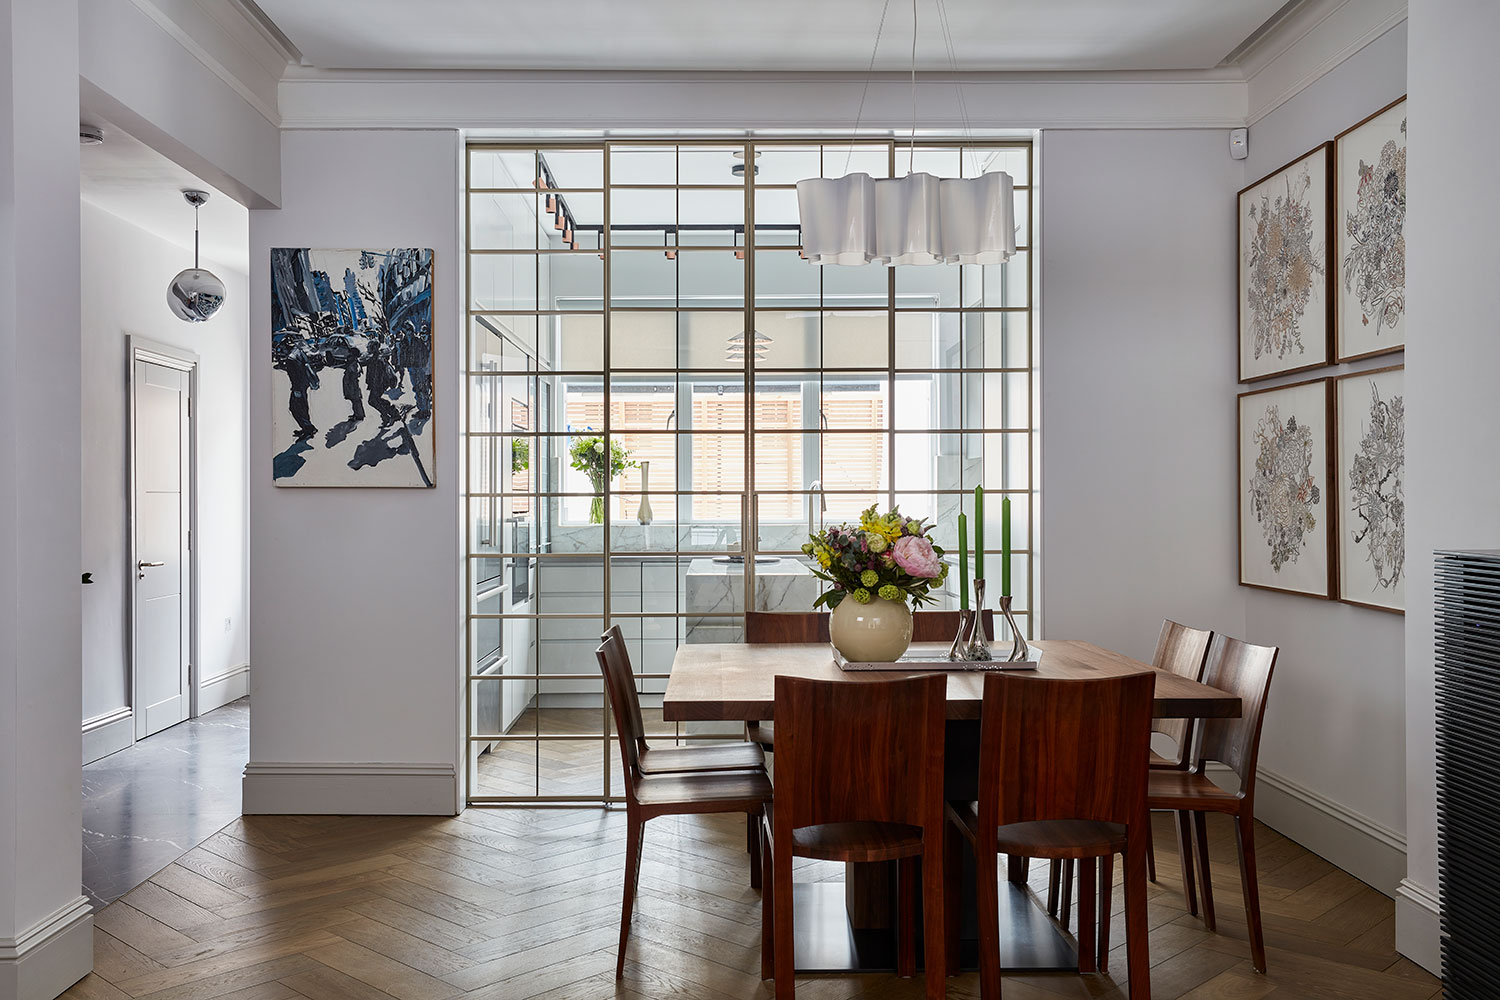 Luxury open plan living and dining room in high end duplex apartment, Marylebone, London